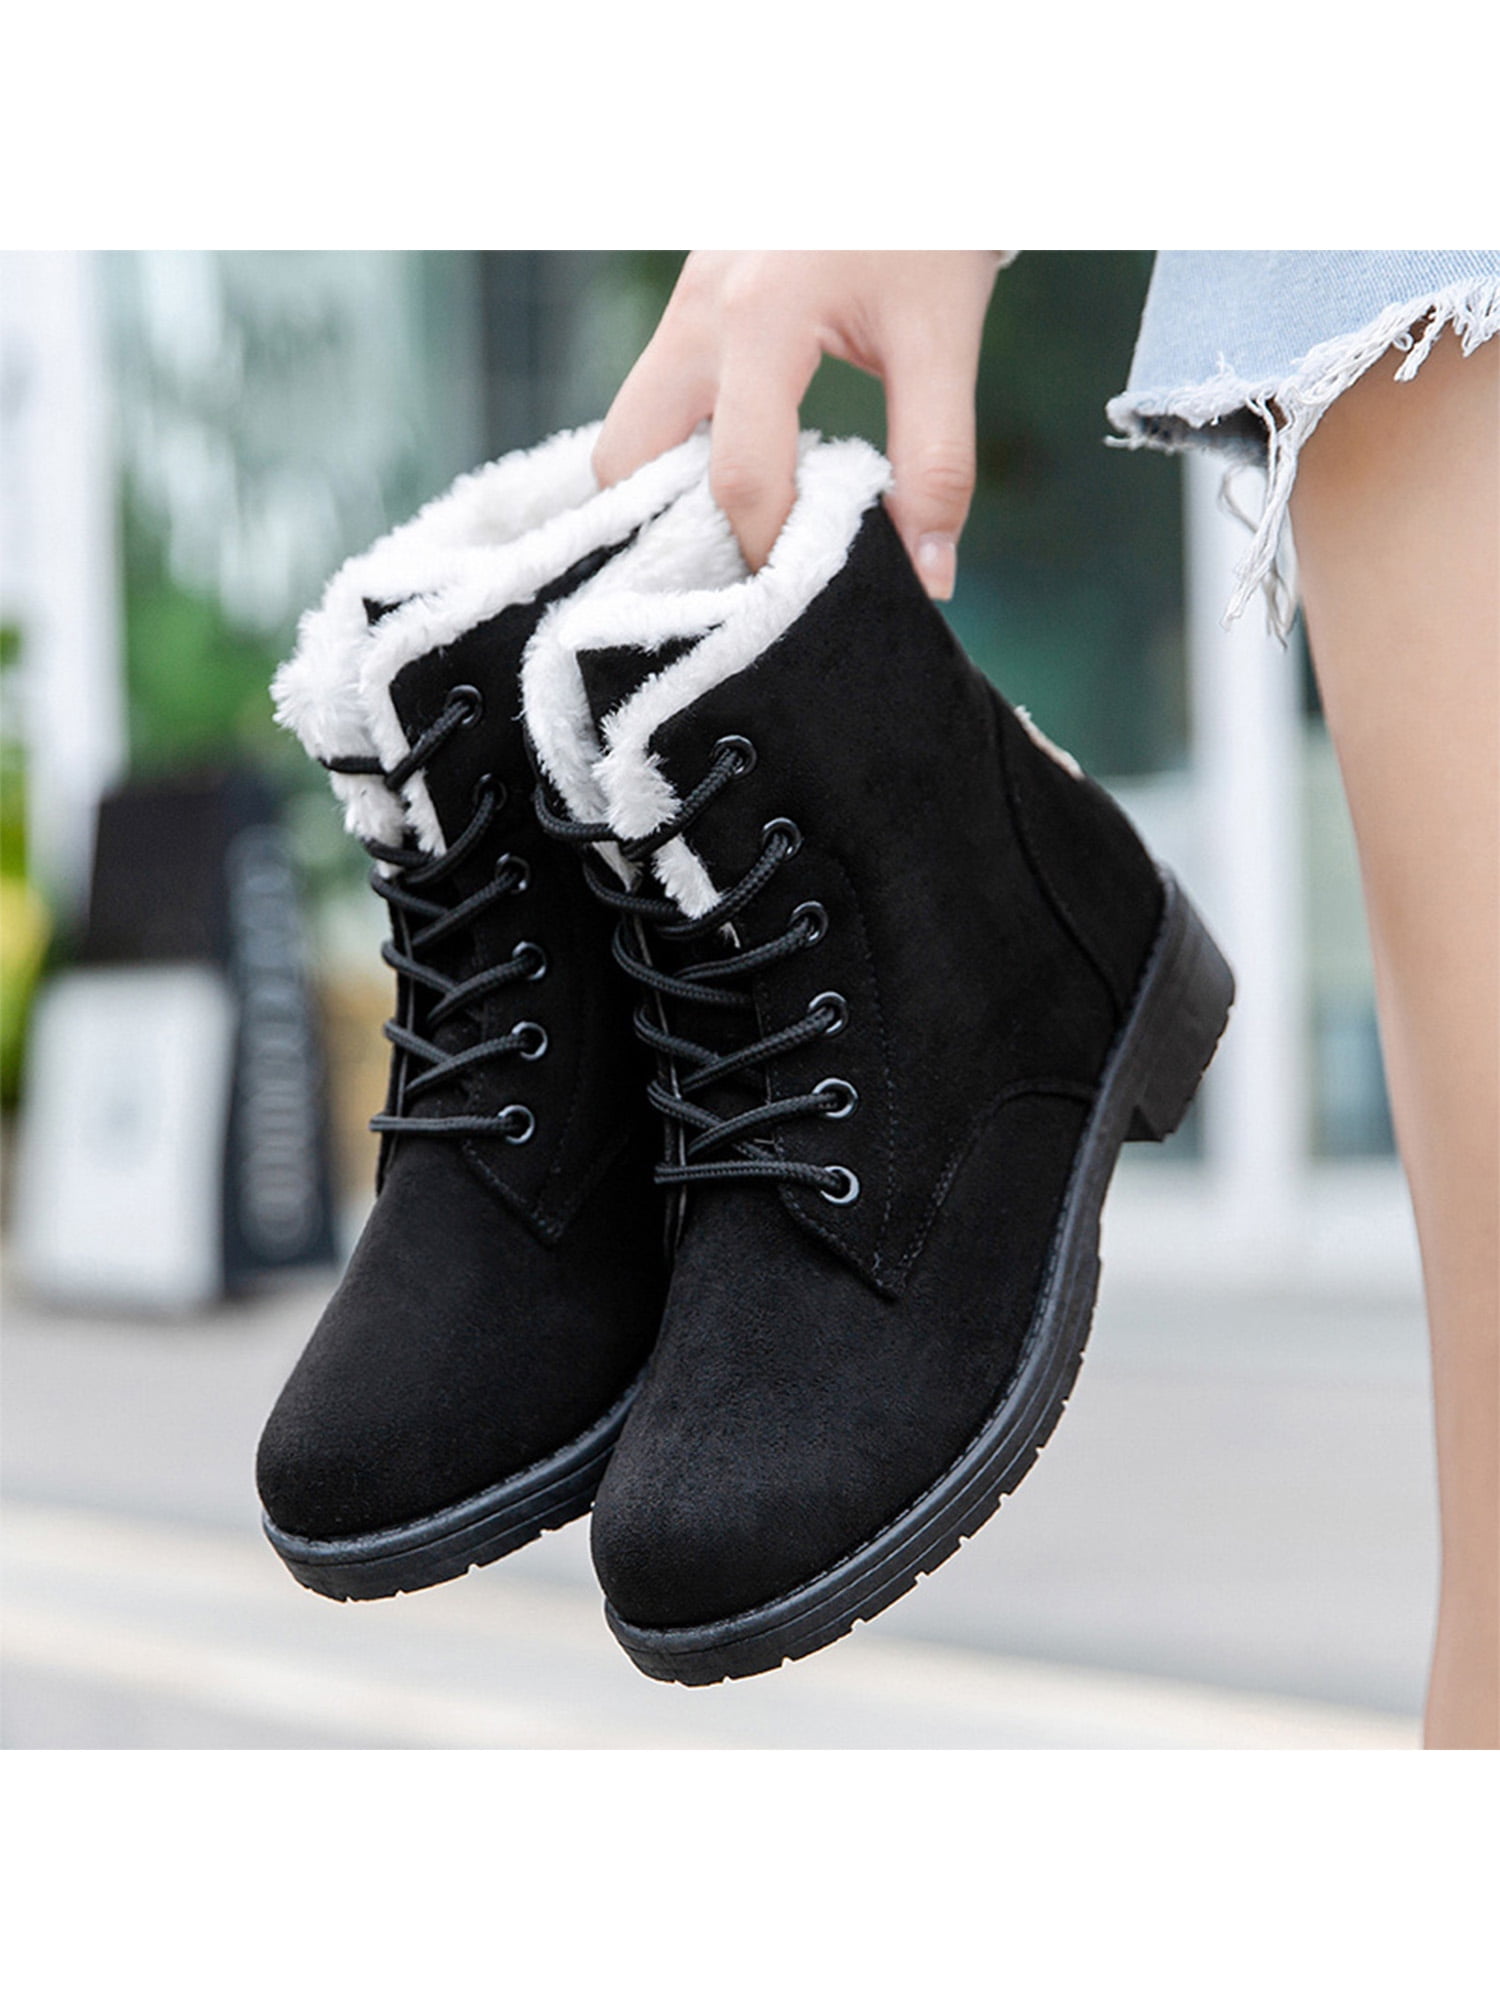 Fangasis Winter Boots for Women Platform Cotton Warm Plush Snow Ankle Boot  Lace Up Flat Booties Cute Plus Size Shoes Warm Thicken Boots for Ladies